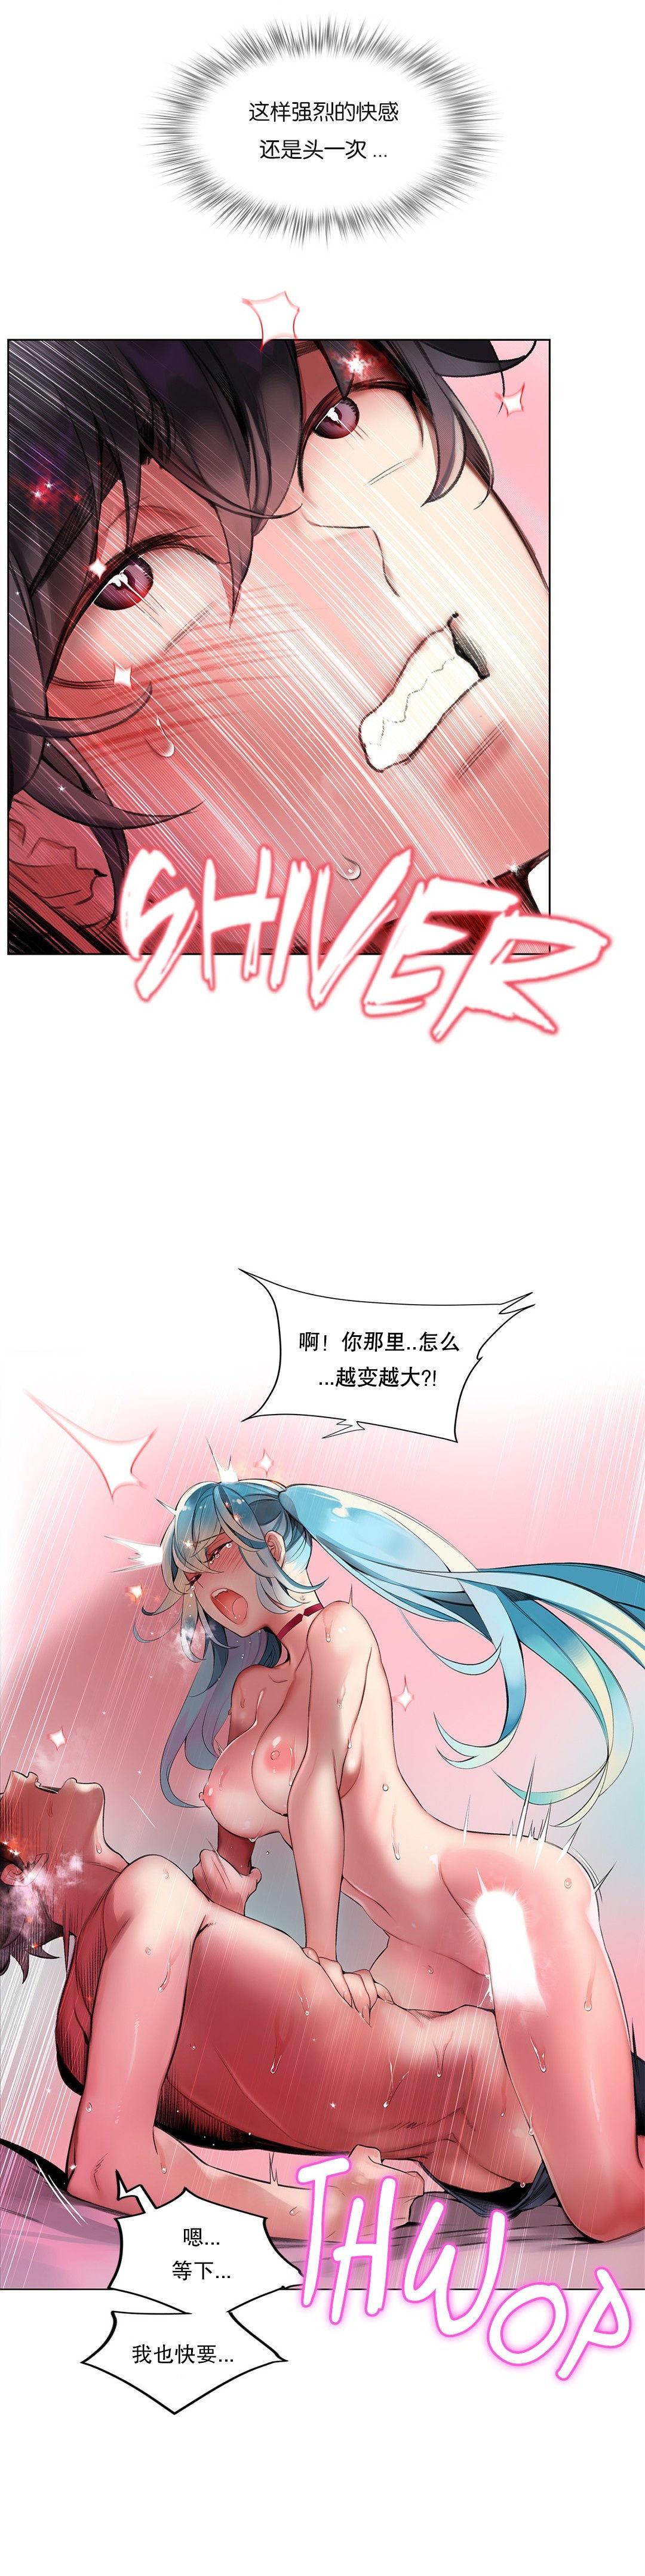 [Juder] Lilith`s Cord (第二季) Ch.61-68 [Chinese] [aaatwist个人汉化] [Ongoing] 181